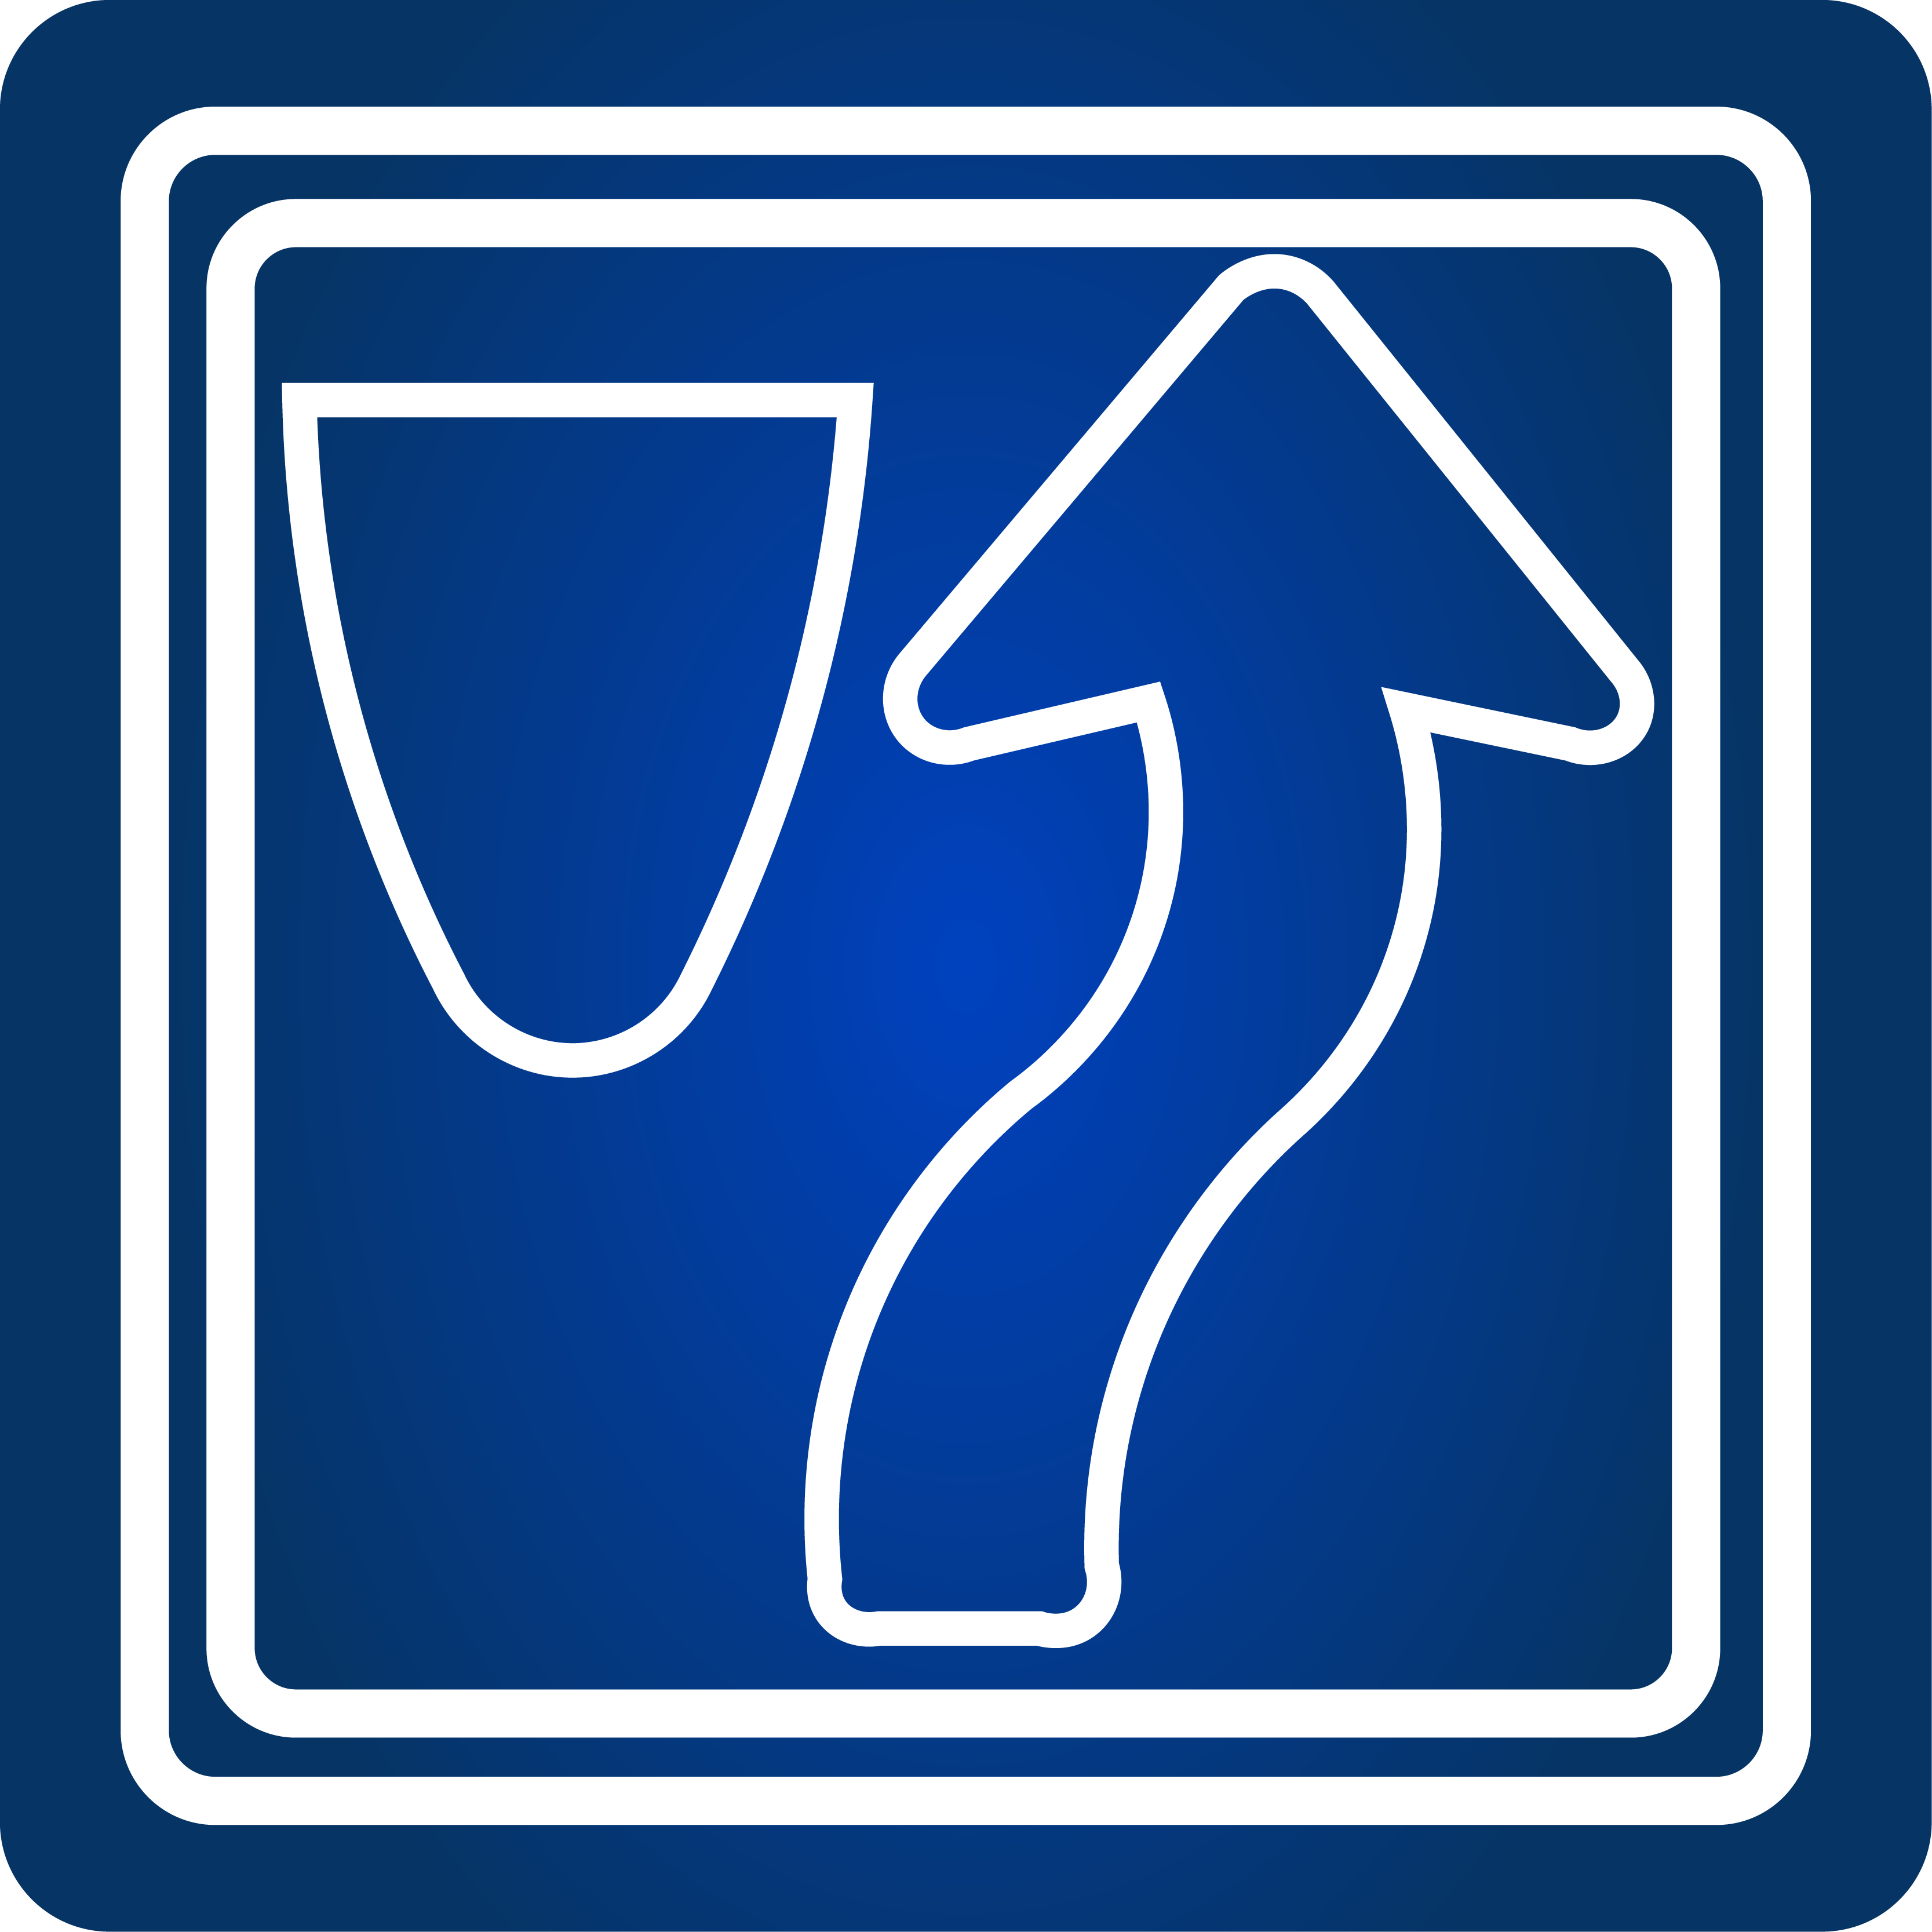 VNS icon - street sign with arrow and shield